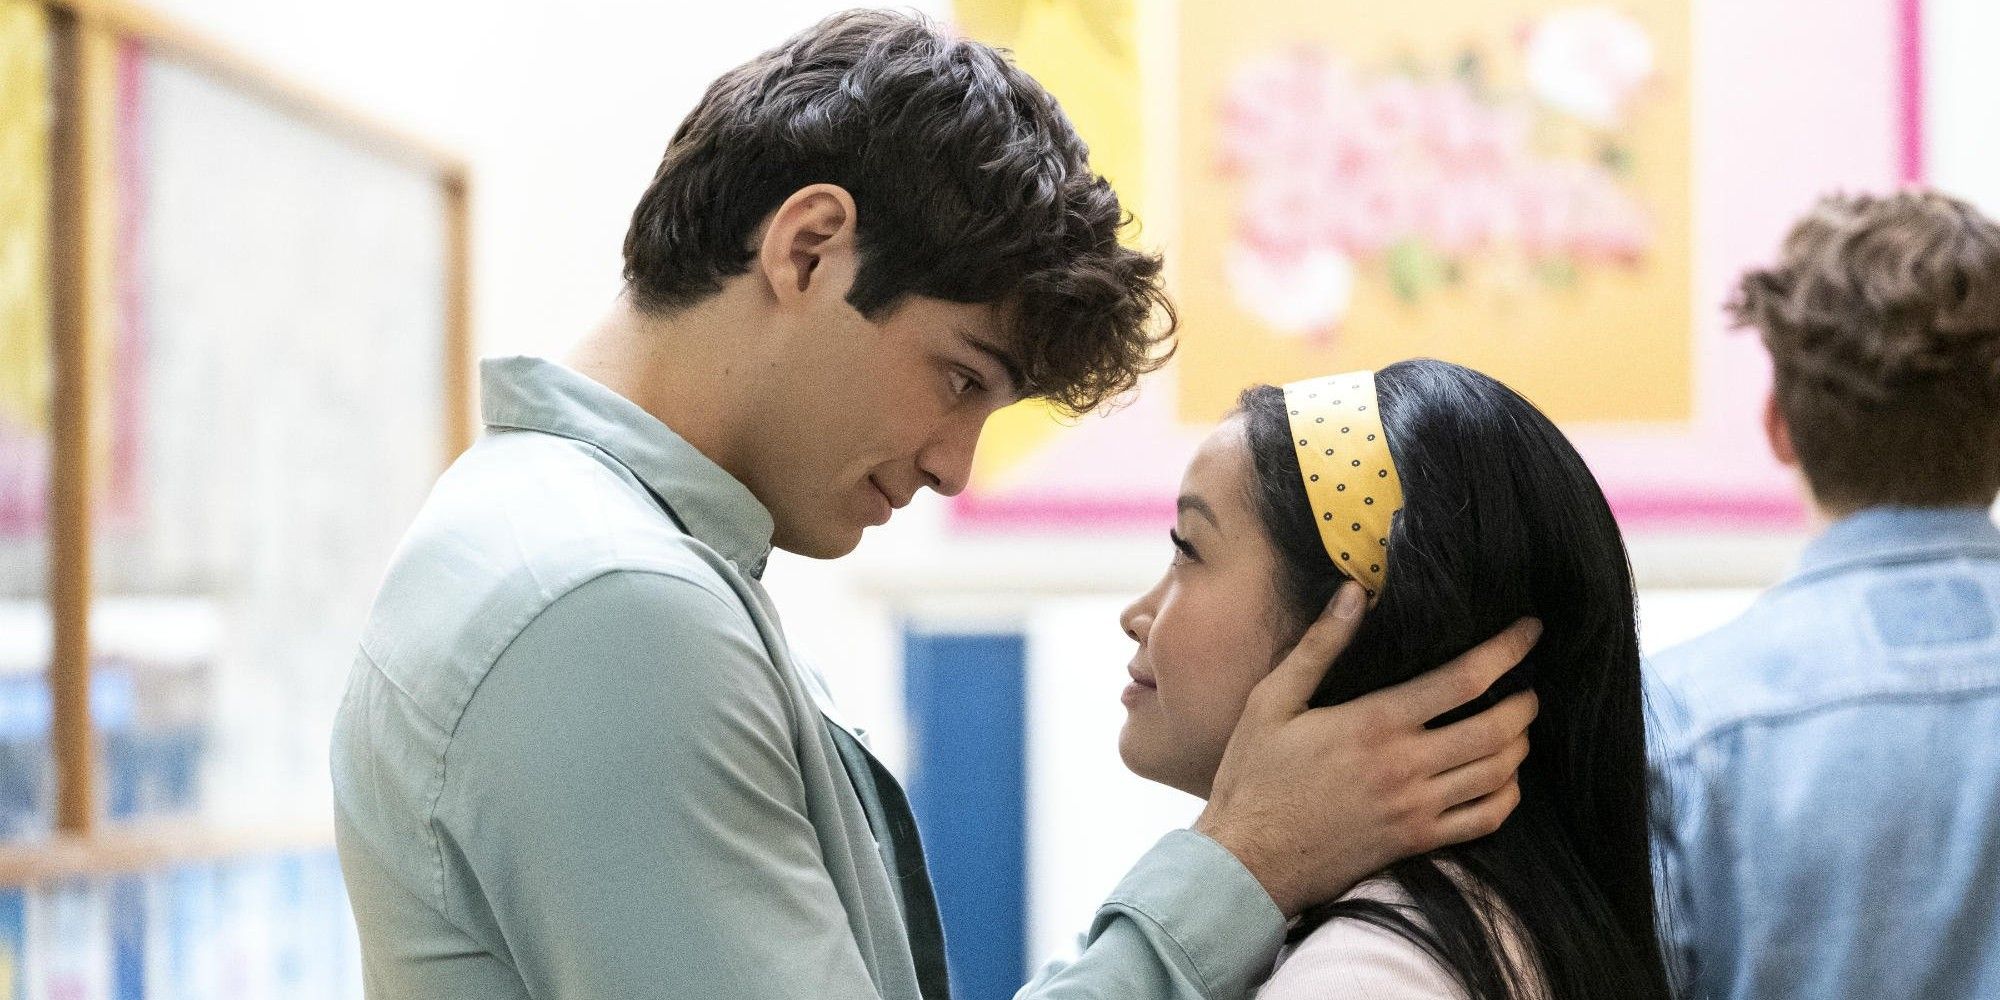 Noah Centineo and Lana Condor from To All the Boys PS I Still Love You